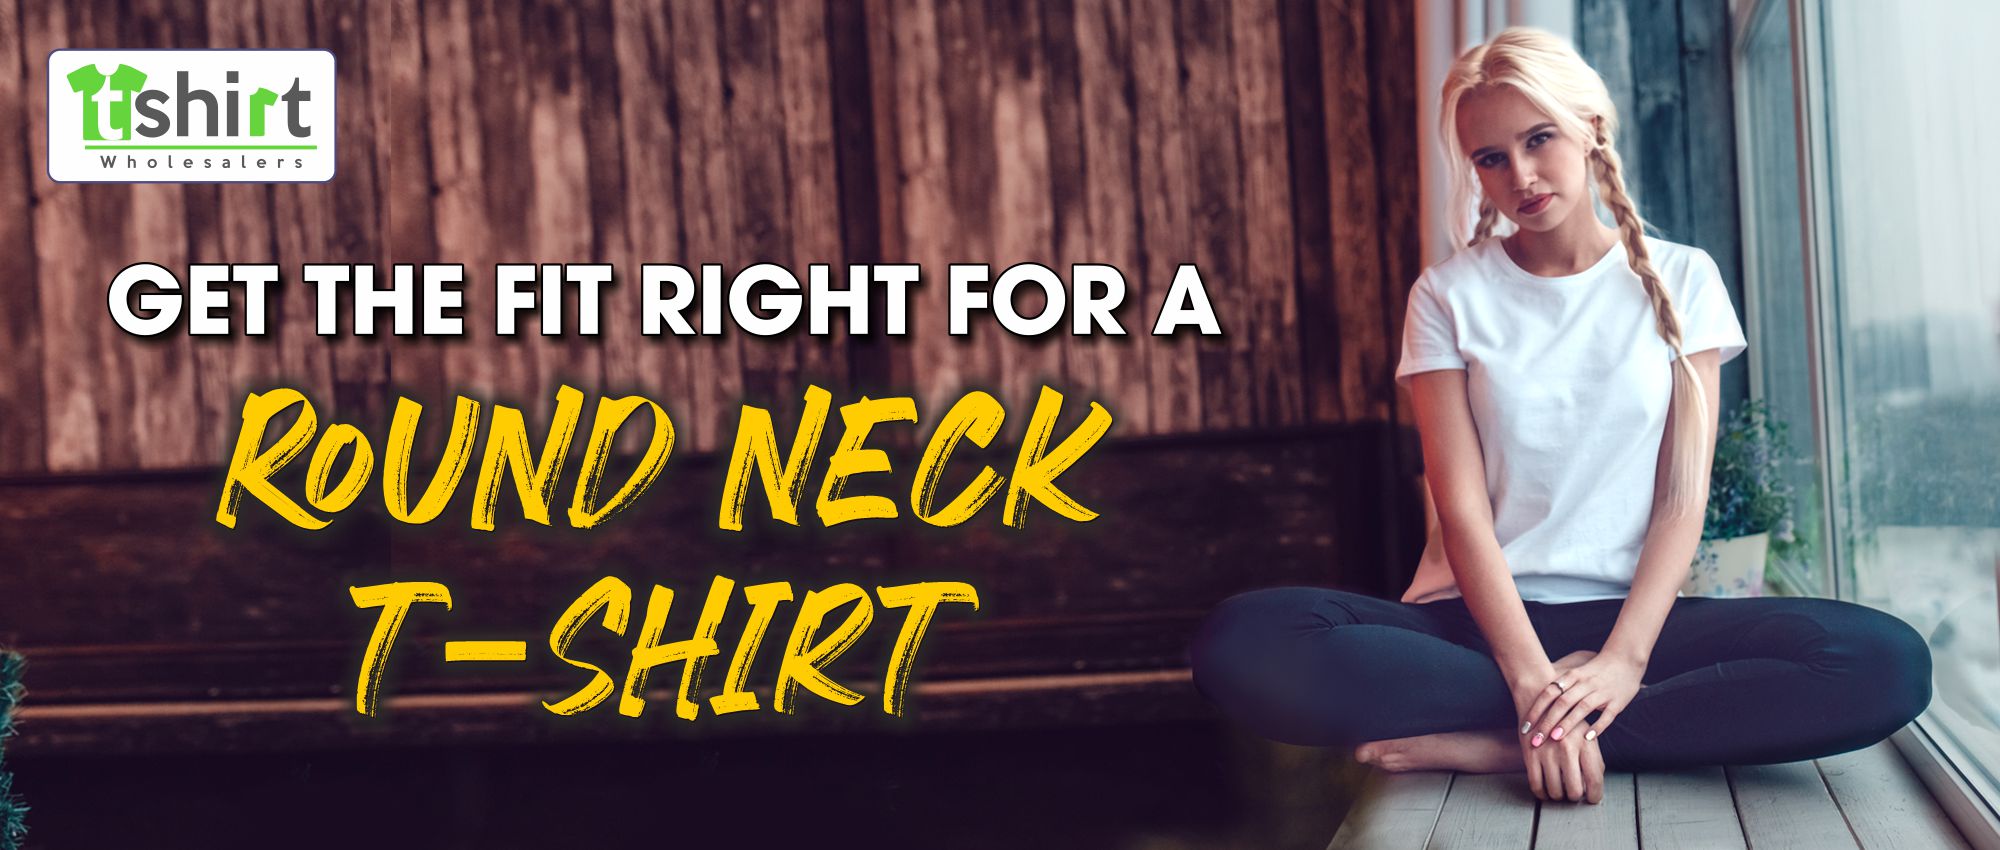 GET THE FIT RIGHT FOR A ROUND NECK T-SHIRT